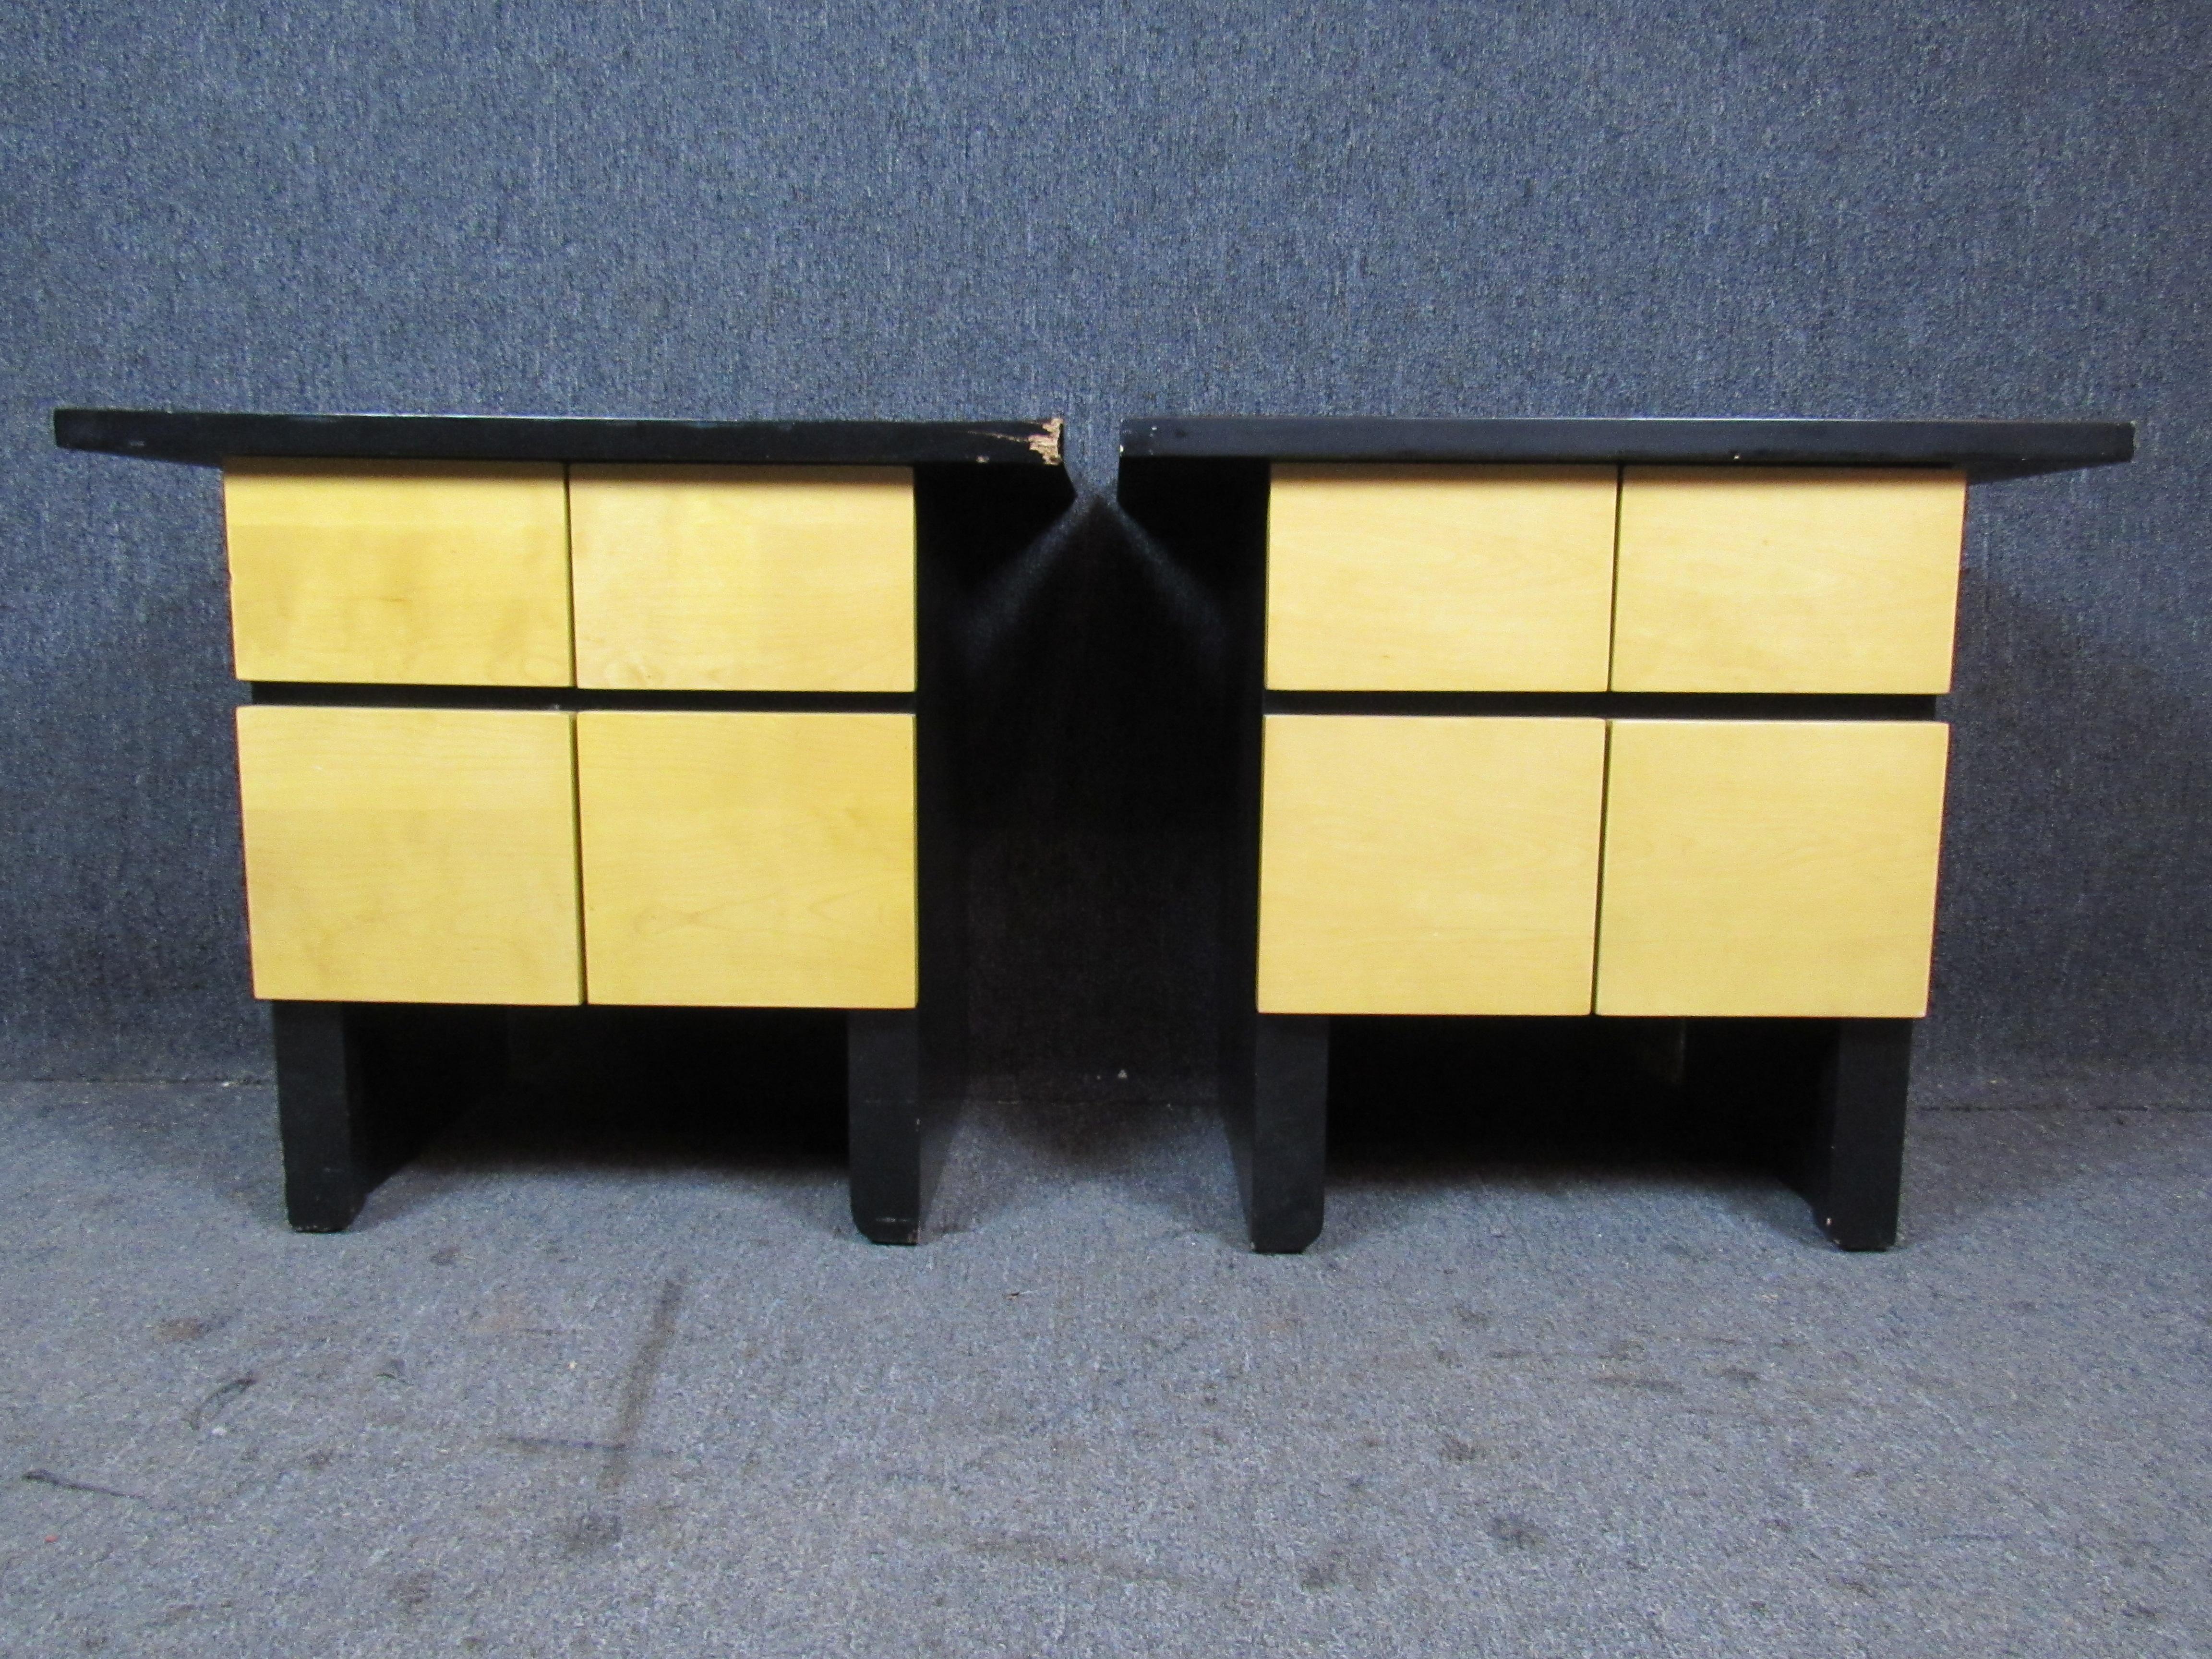 Funky pair of piano lacquer and maple side tables combining minimalist, modernist, and Asian design elements! With four pull-out drawers each, these tables offer plenty of compact storage options for the home or office. Please confirm item pickup